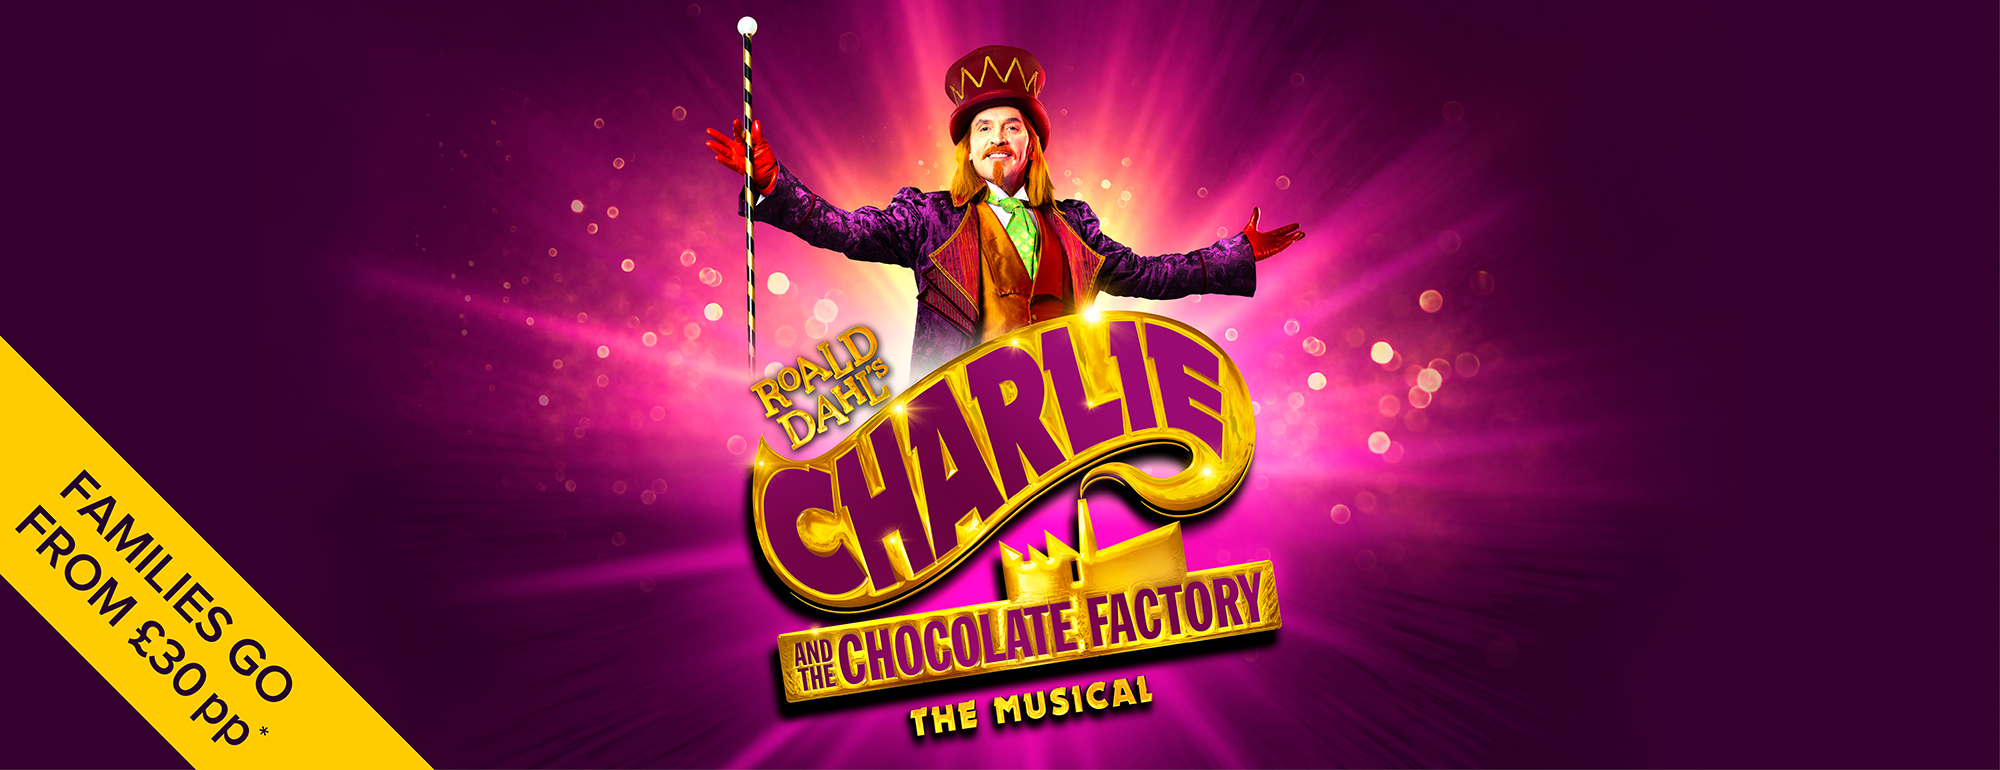 Charlie and the Chocolate Factory promo banner